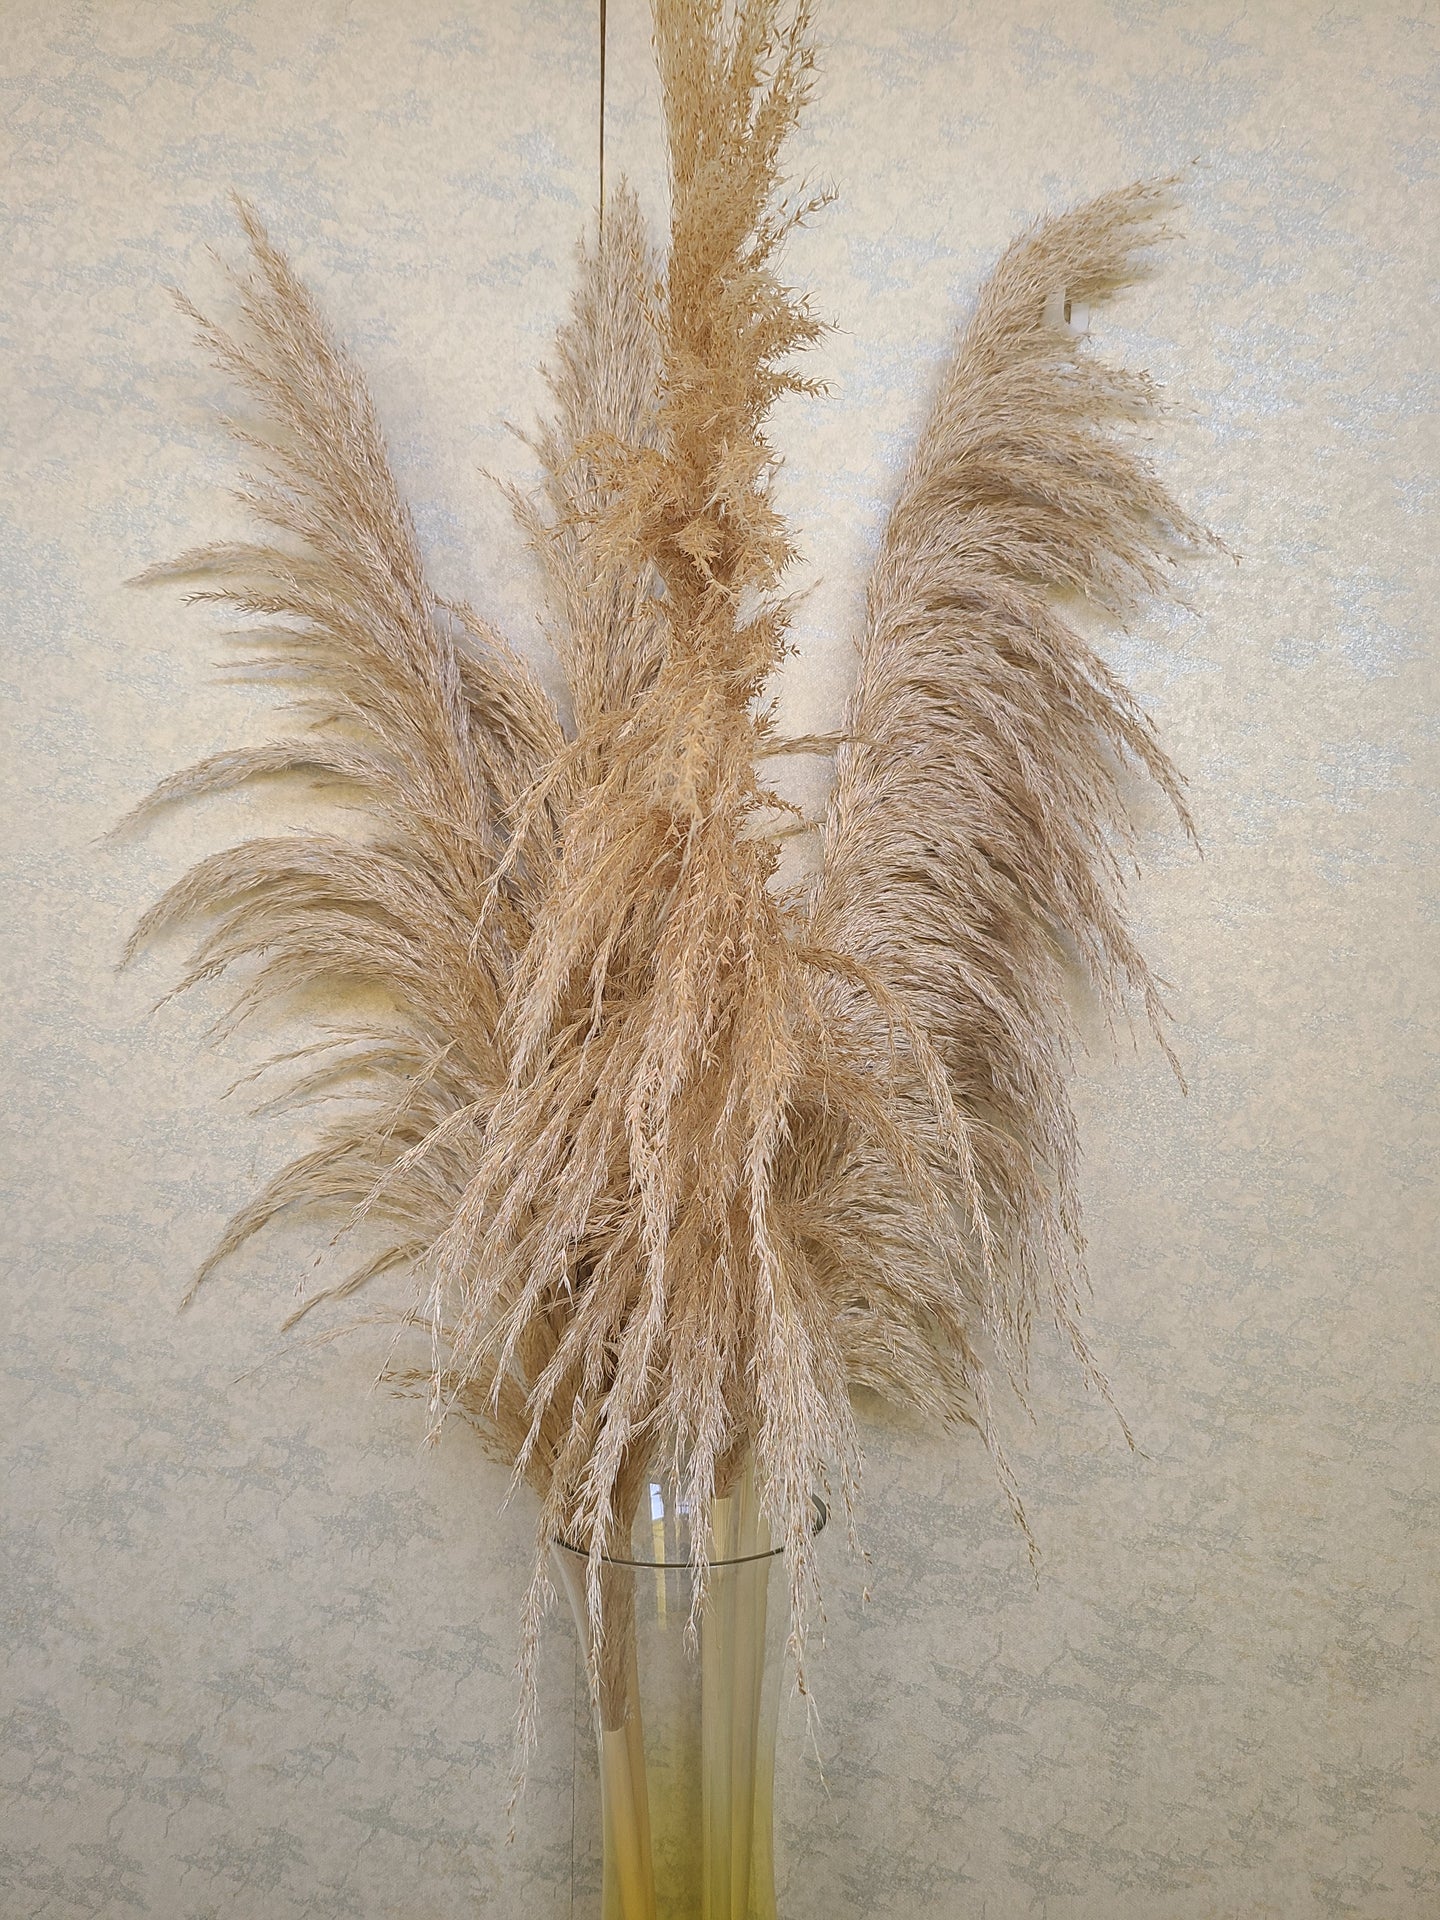 Giant Reed (H:4ft)